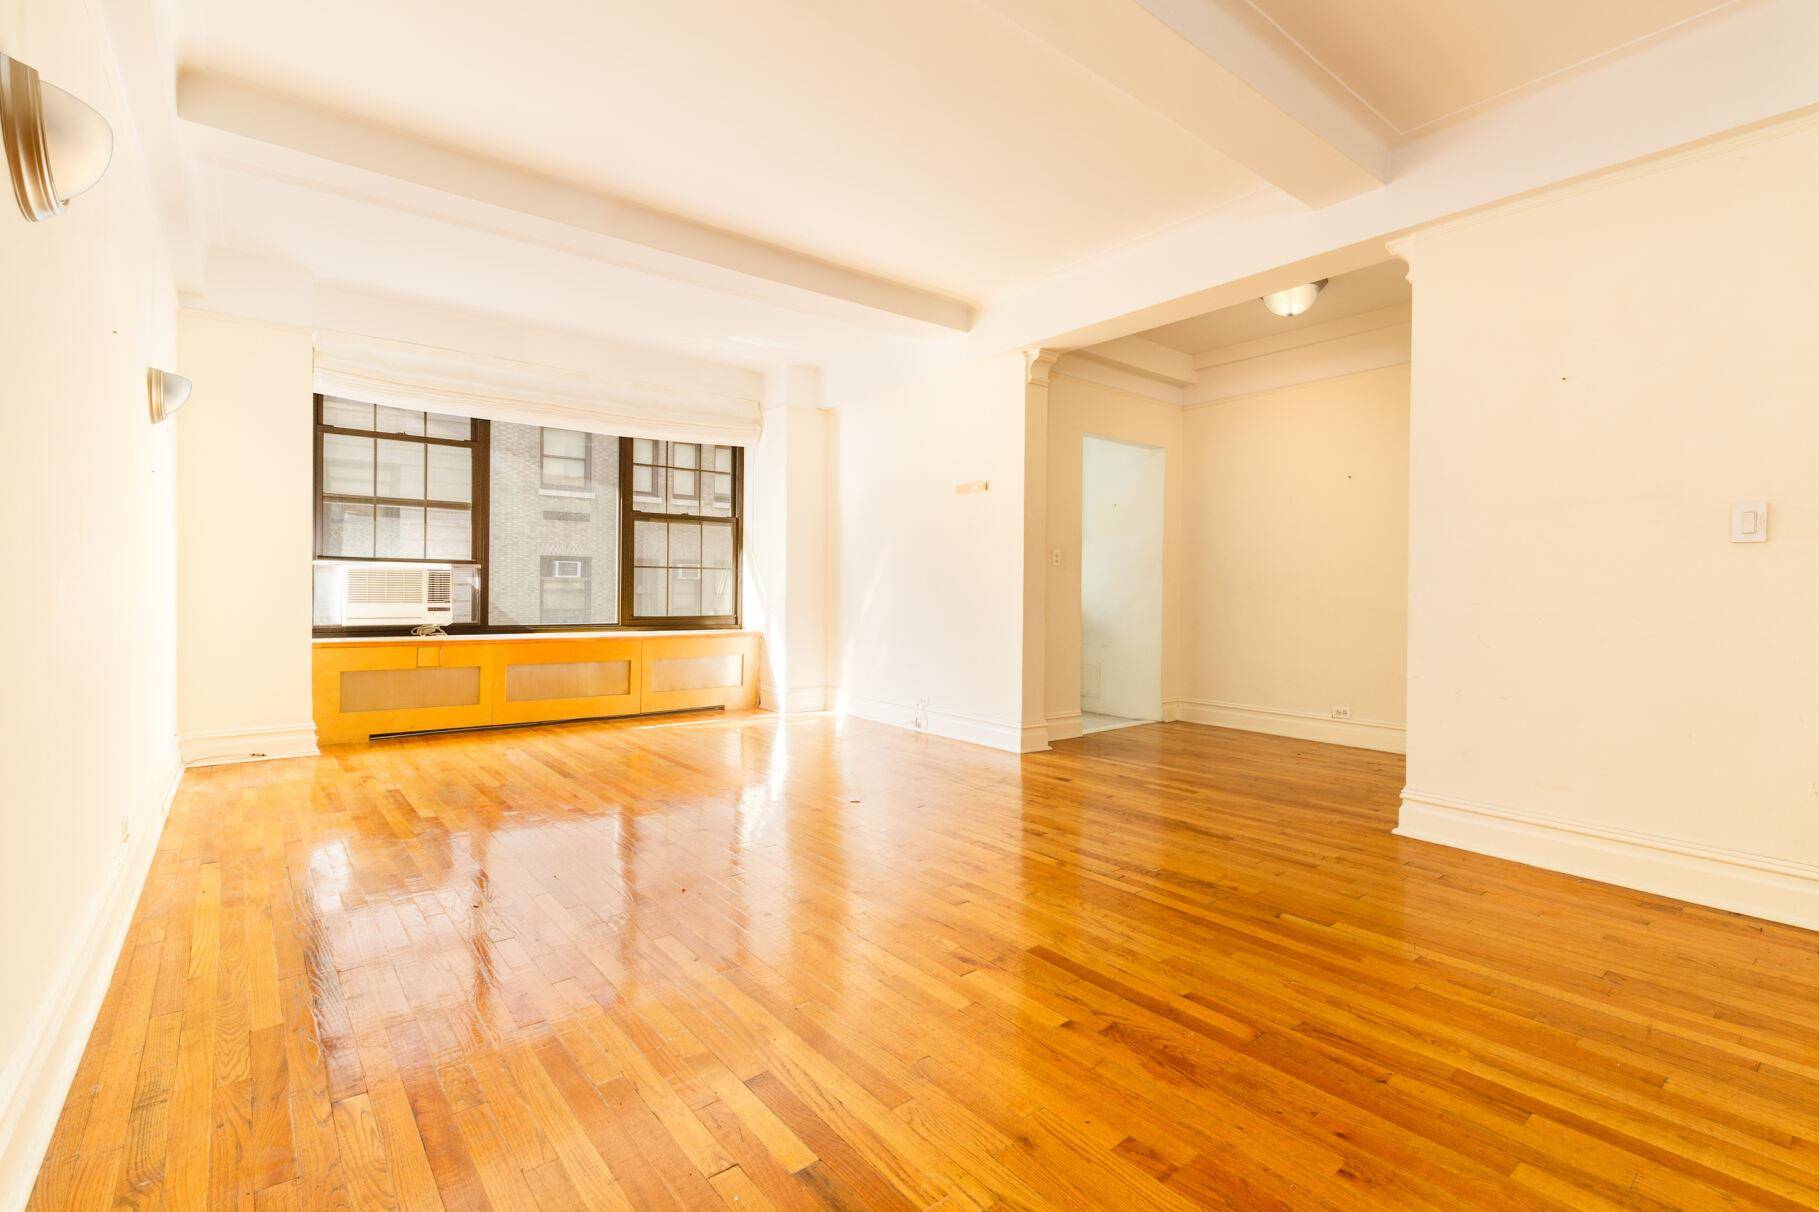 Extra Large One bedroom in Prewar 24 hour doorman building across from Washington Square Park.